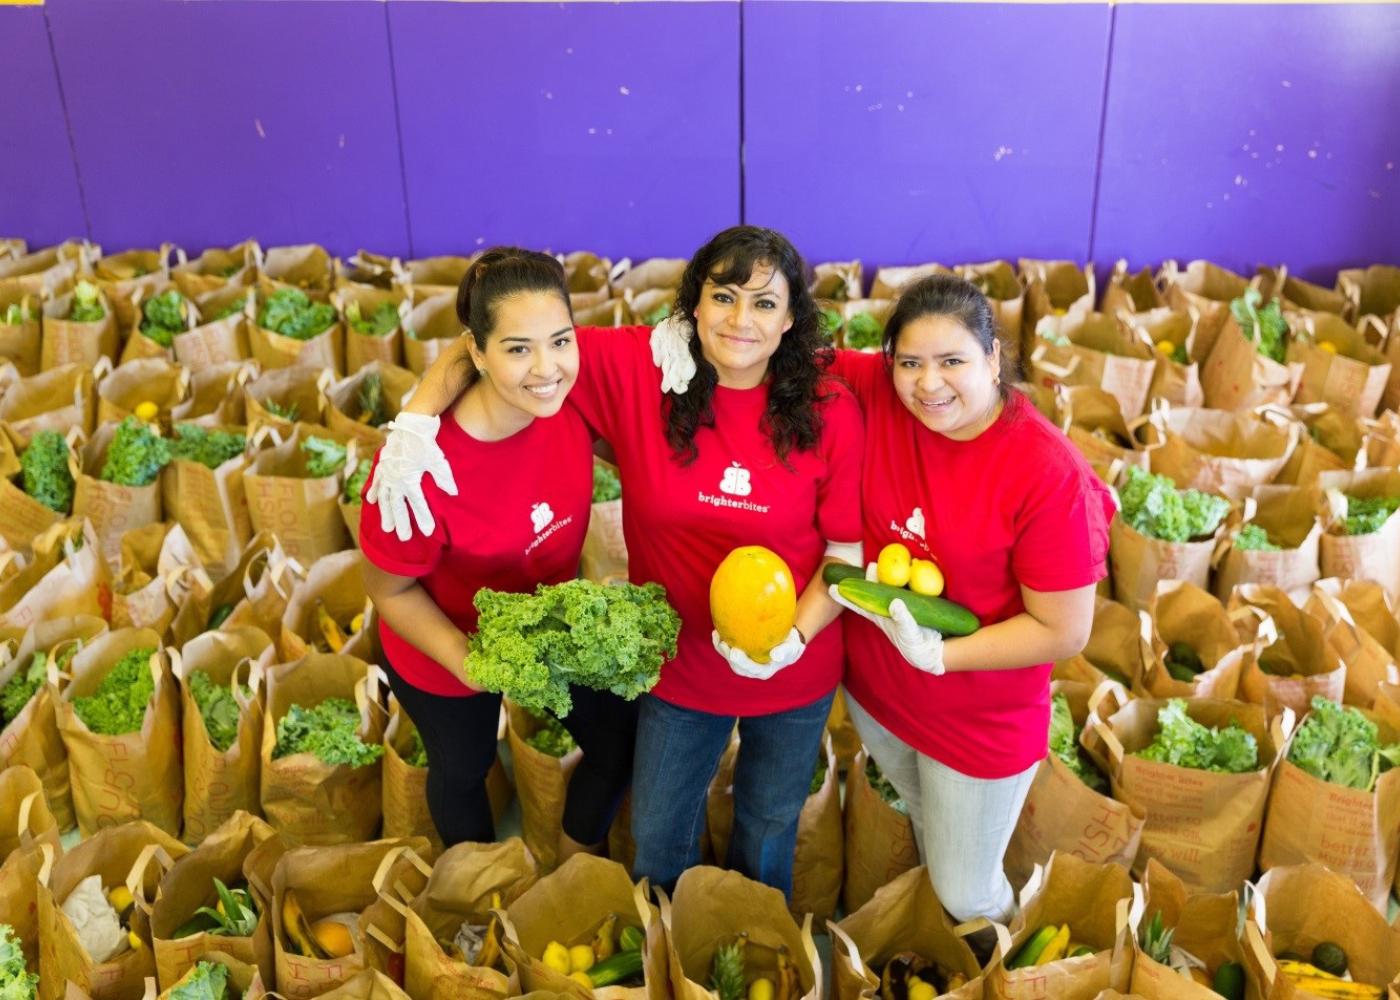 three women stand among a bunch of produce filled bags